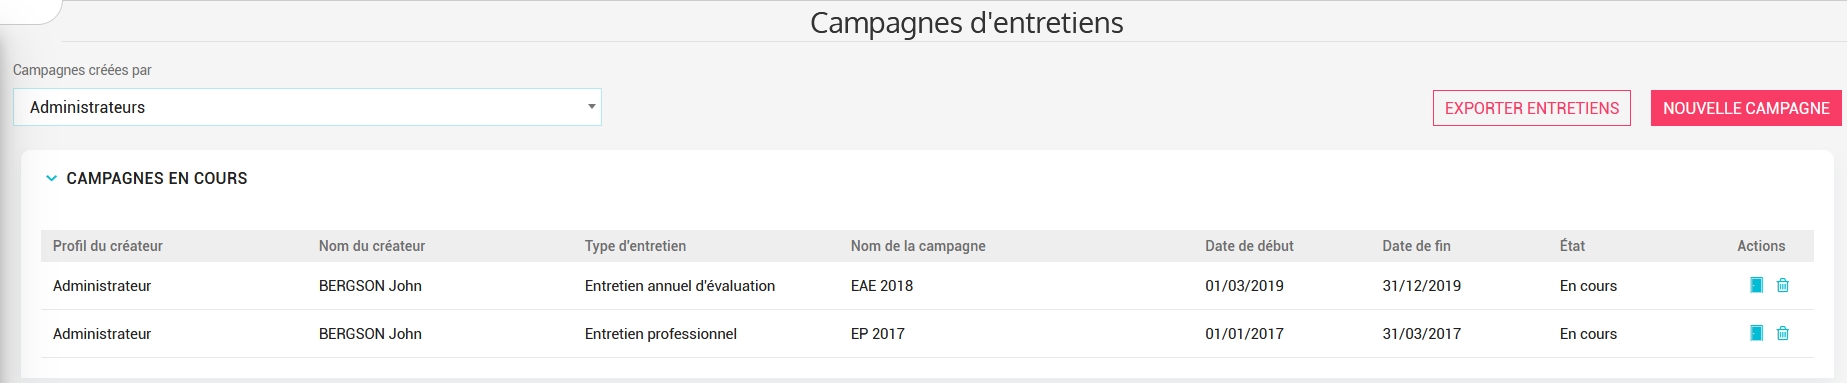 ouvrir_une_campagne.jpg